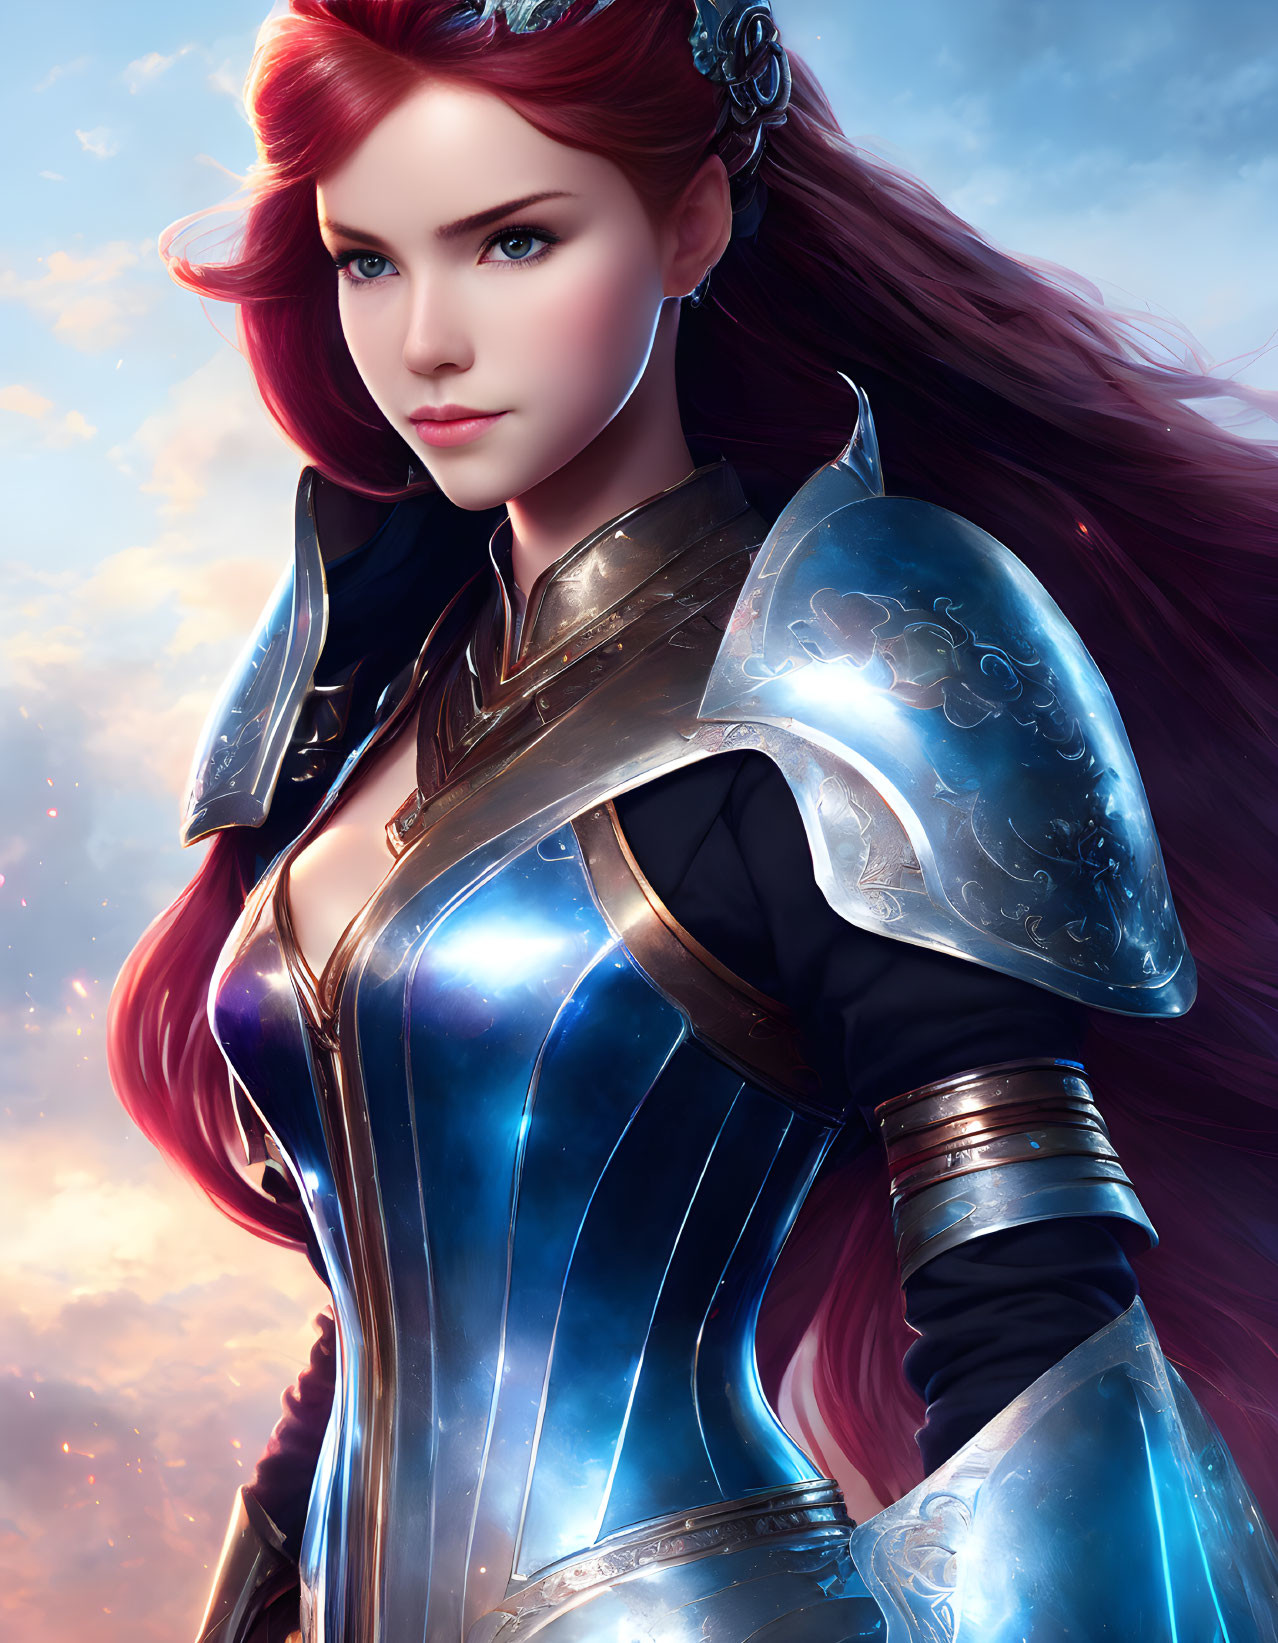 Digital artwork featuring woman with red hair and silver armor on dramatic sky backdrop